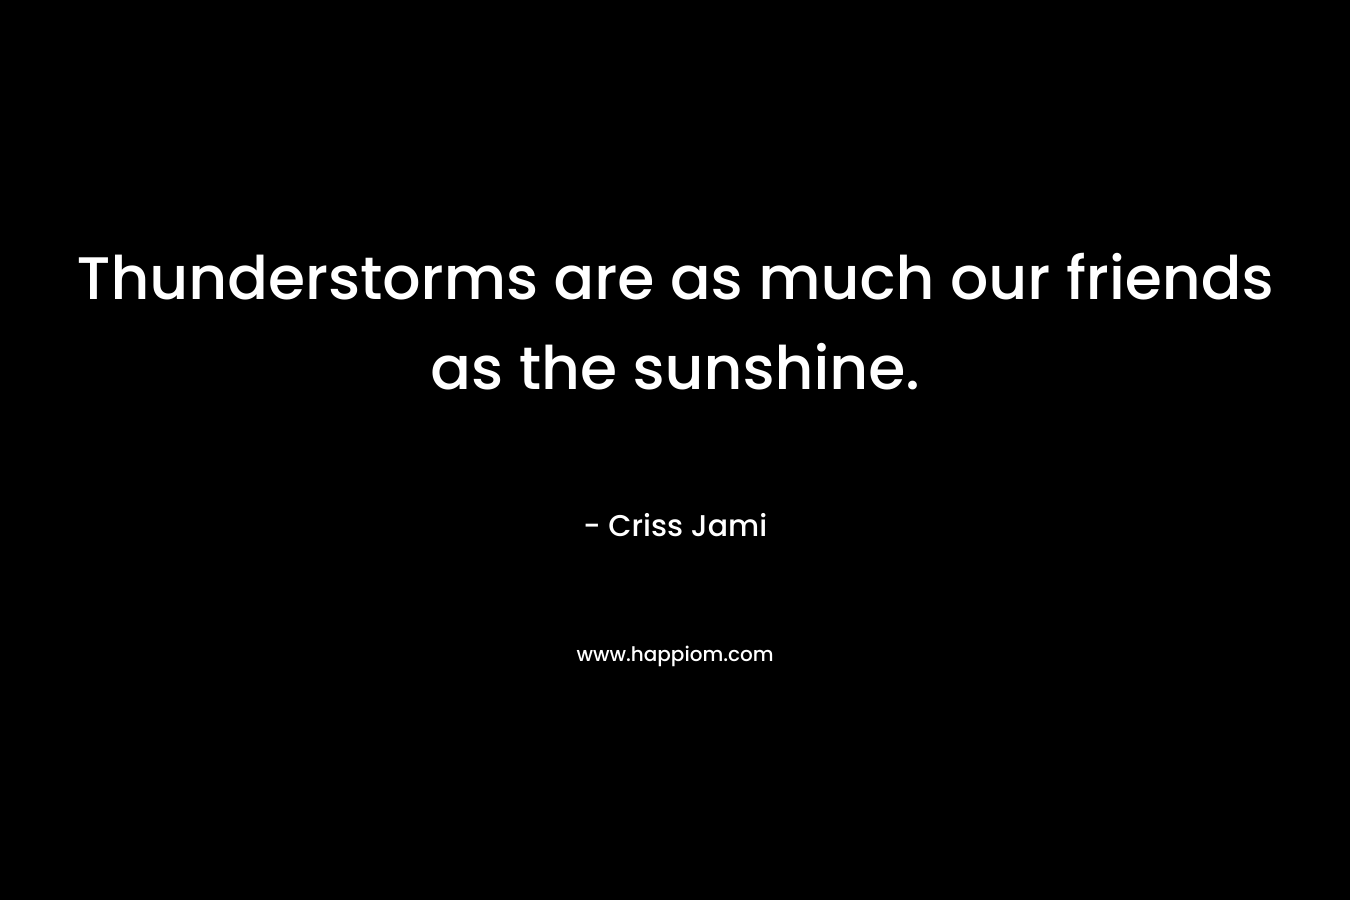 Thunderstorms are as much our friends as the sunshine. – Criss Jami